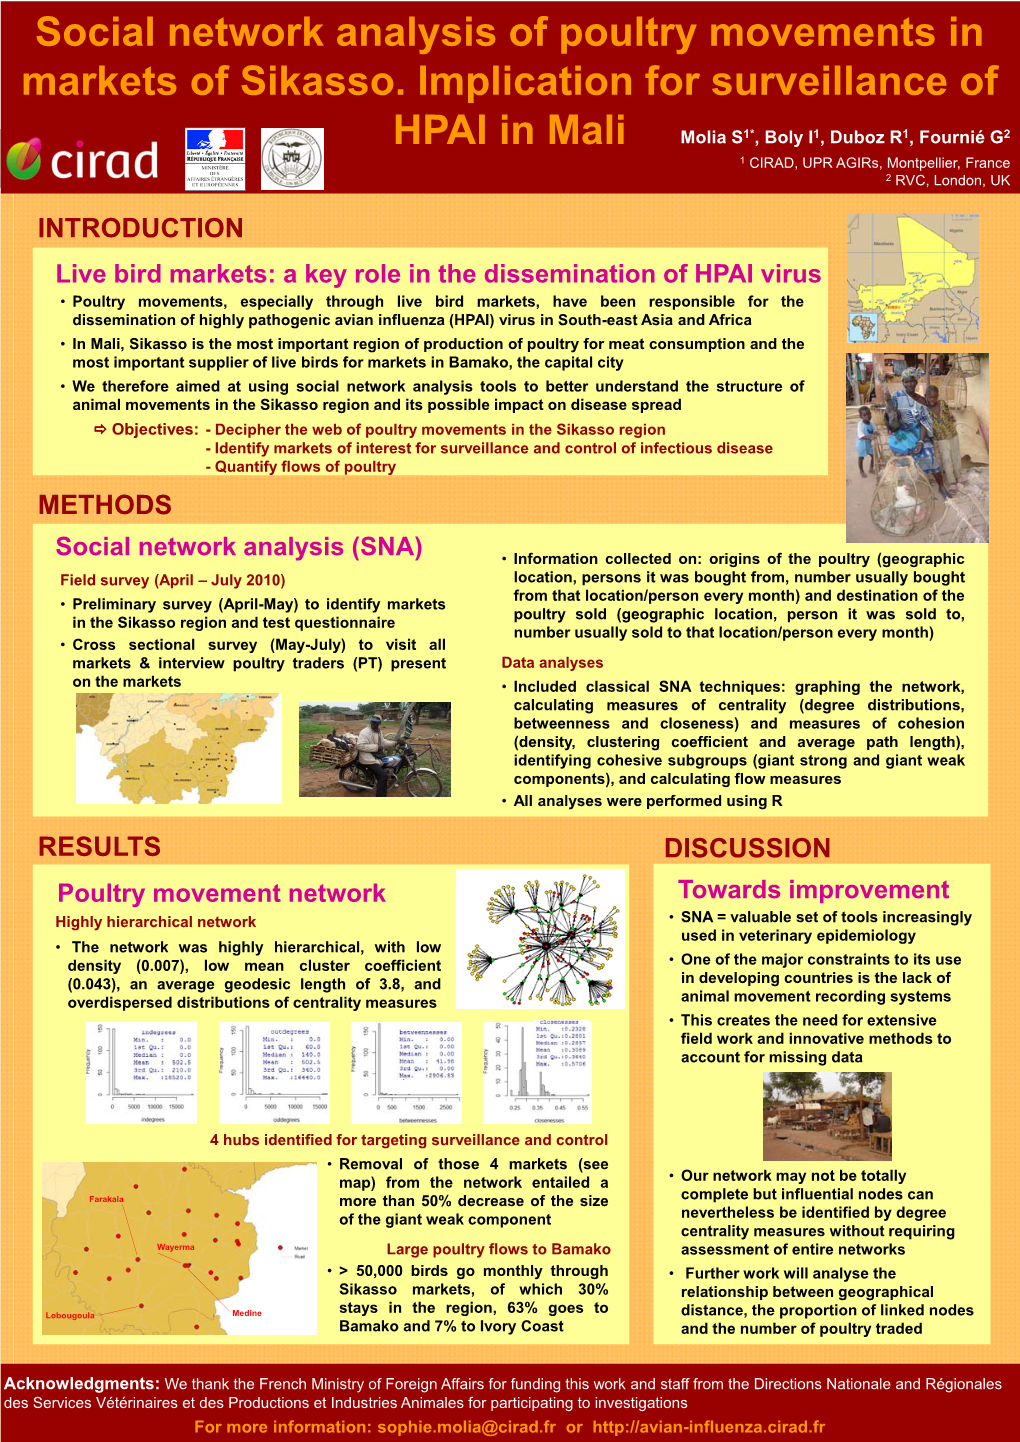 Social Network Analysis of Poultry Movements in Markets of Sikasso. Implication for Surveillance of HPAI in Mali